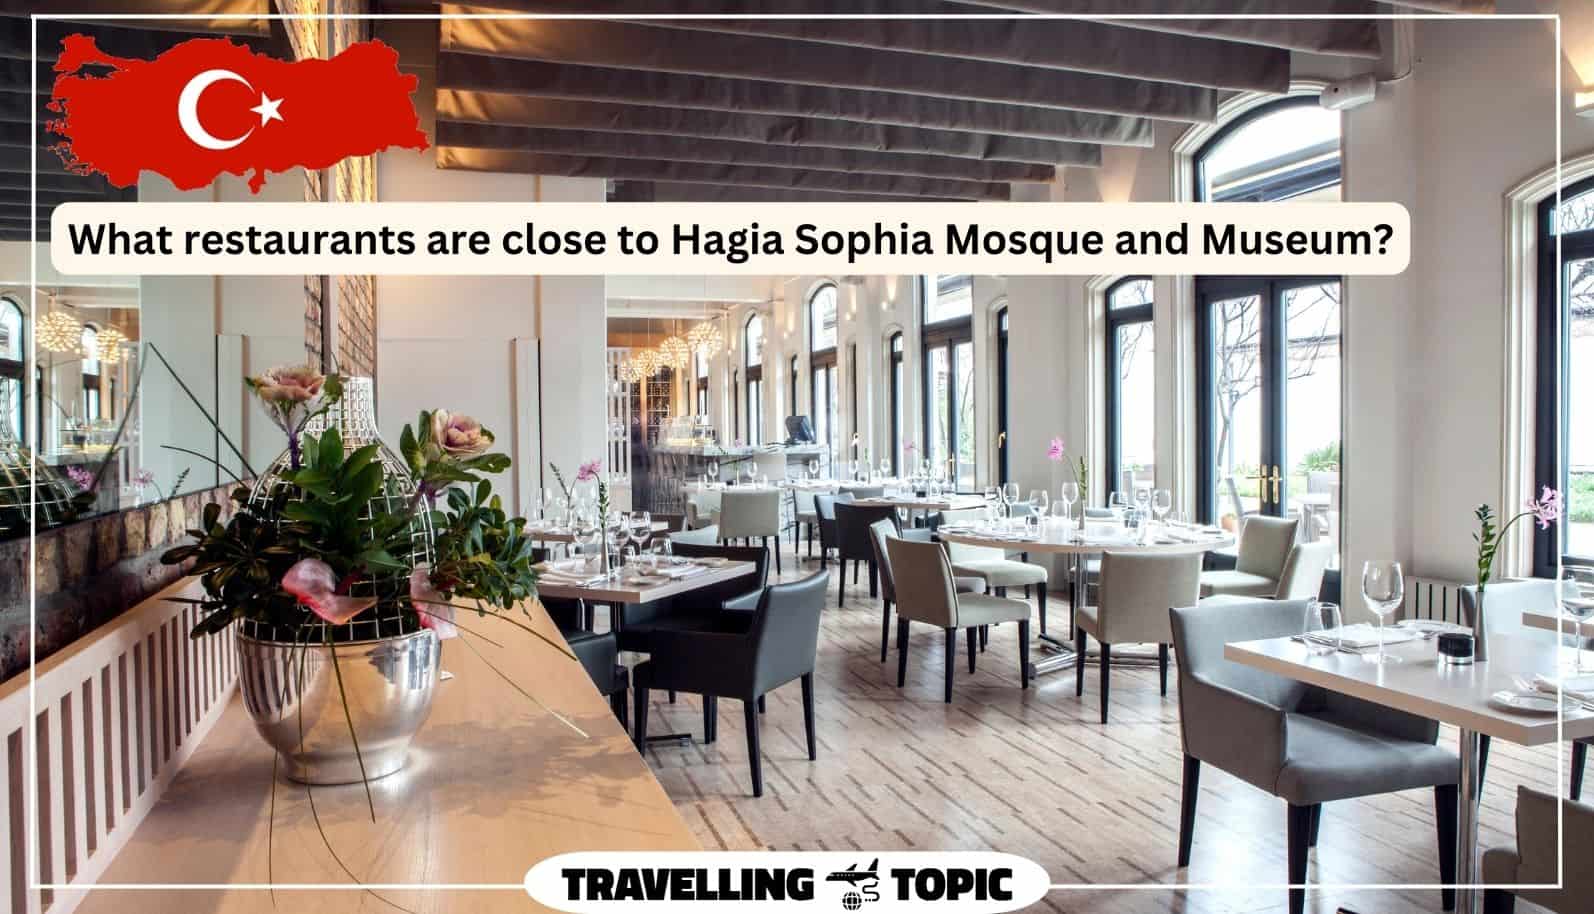 What restaurants are close to Hagia Sophia Mosque and Museum